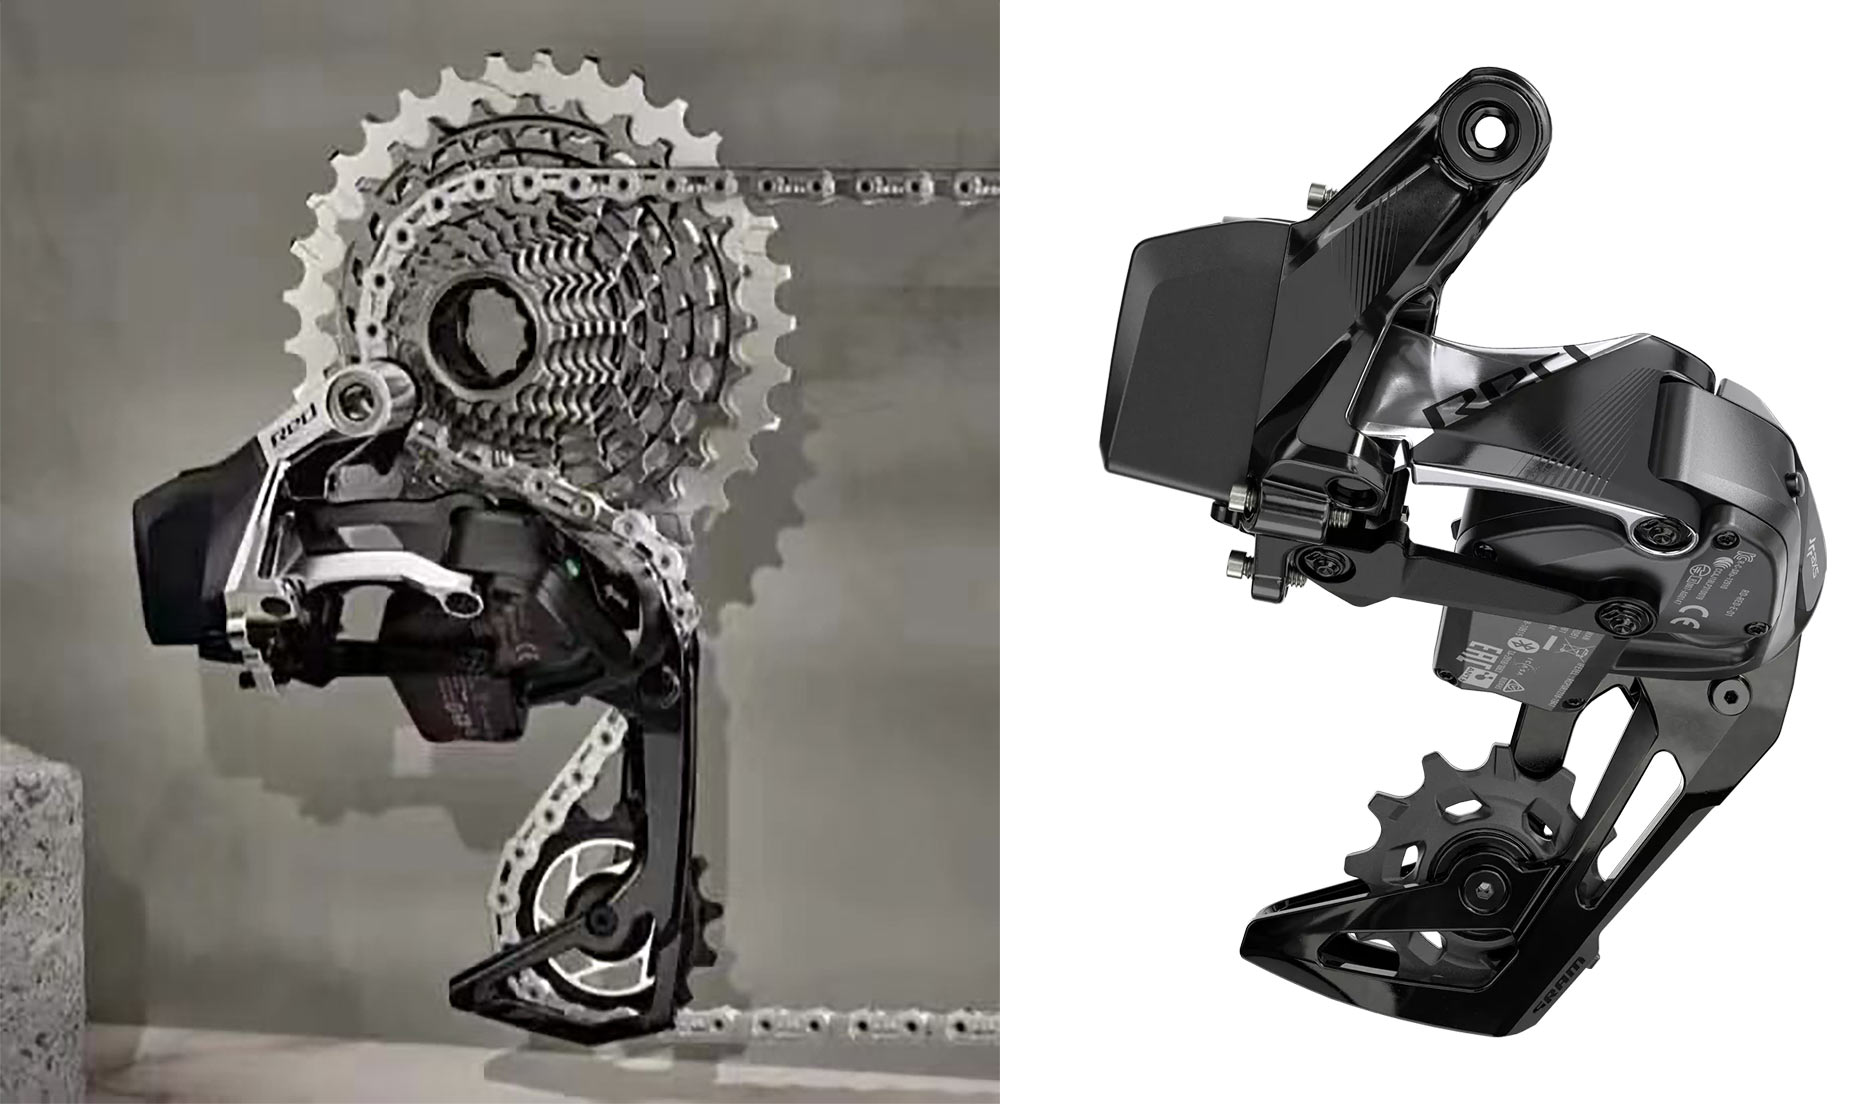 spy shots of new sram red derailleur and cassette